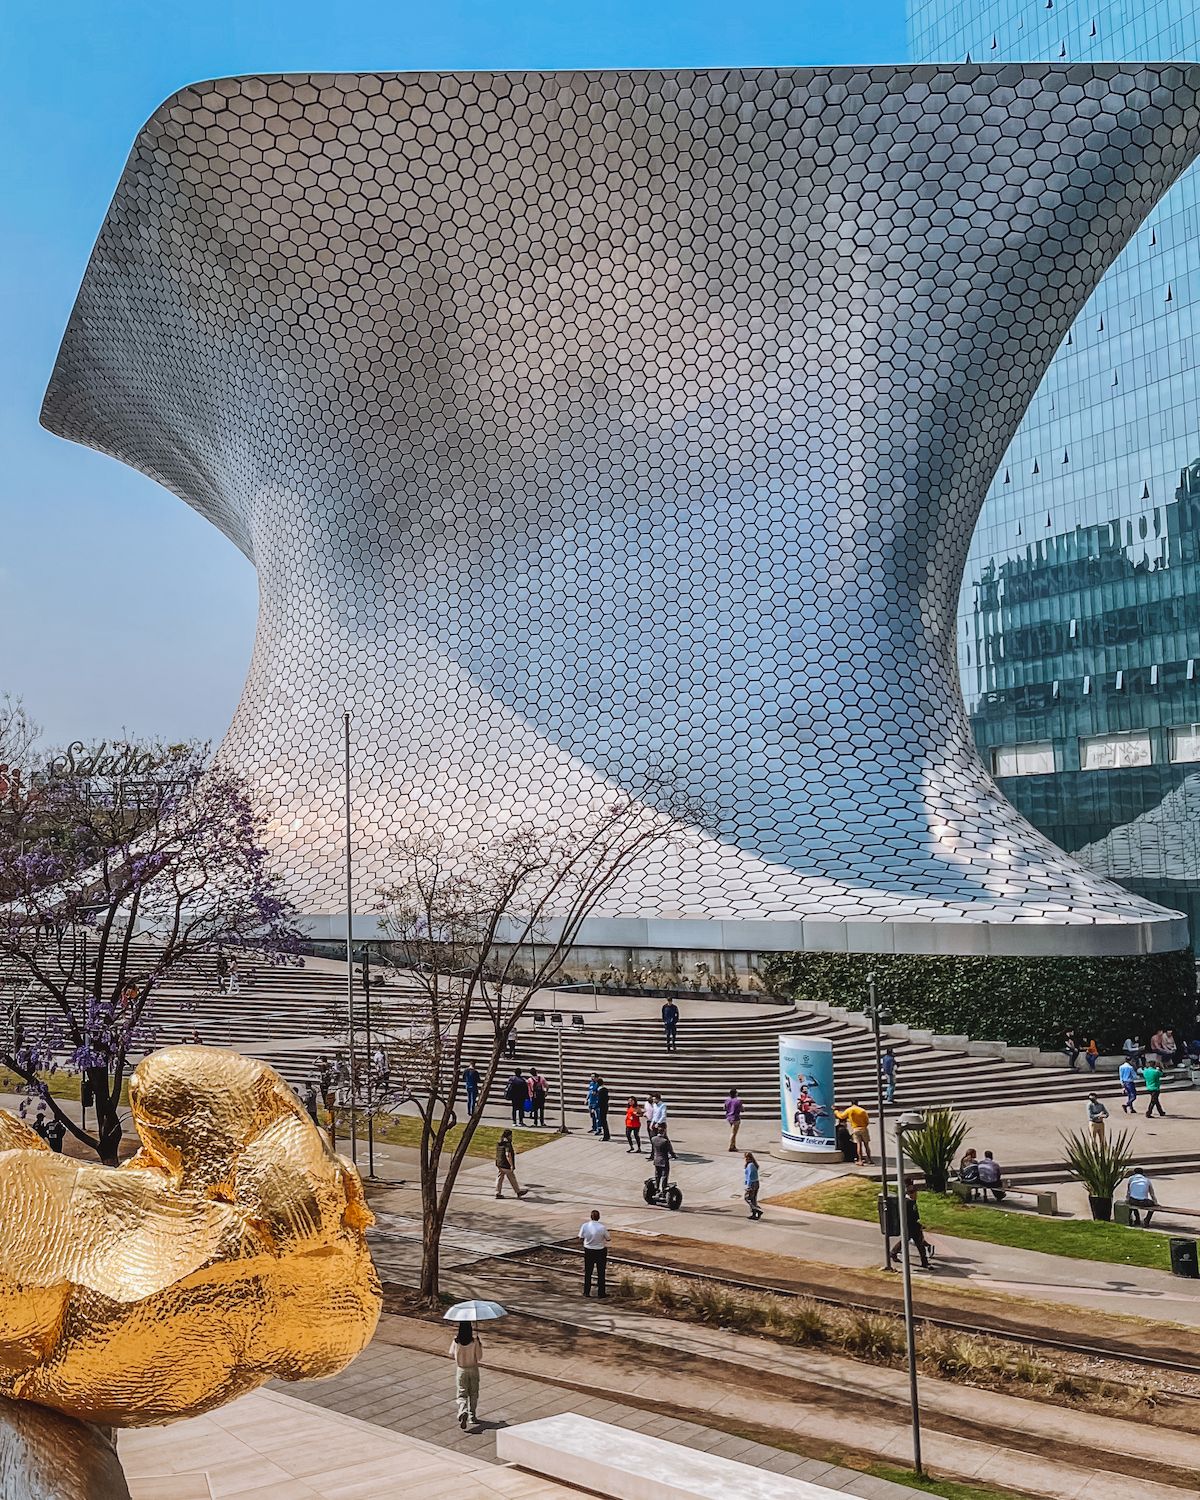 11 Amazing Things to Do in Polanco, Mexico City